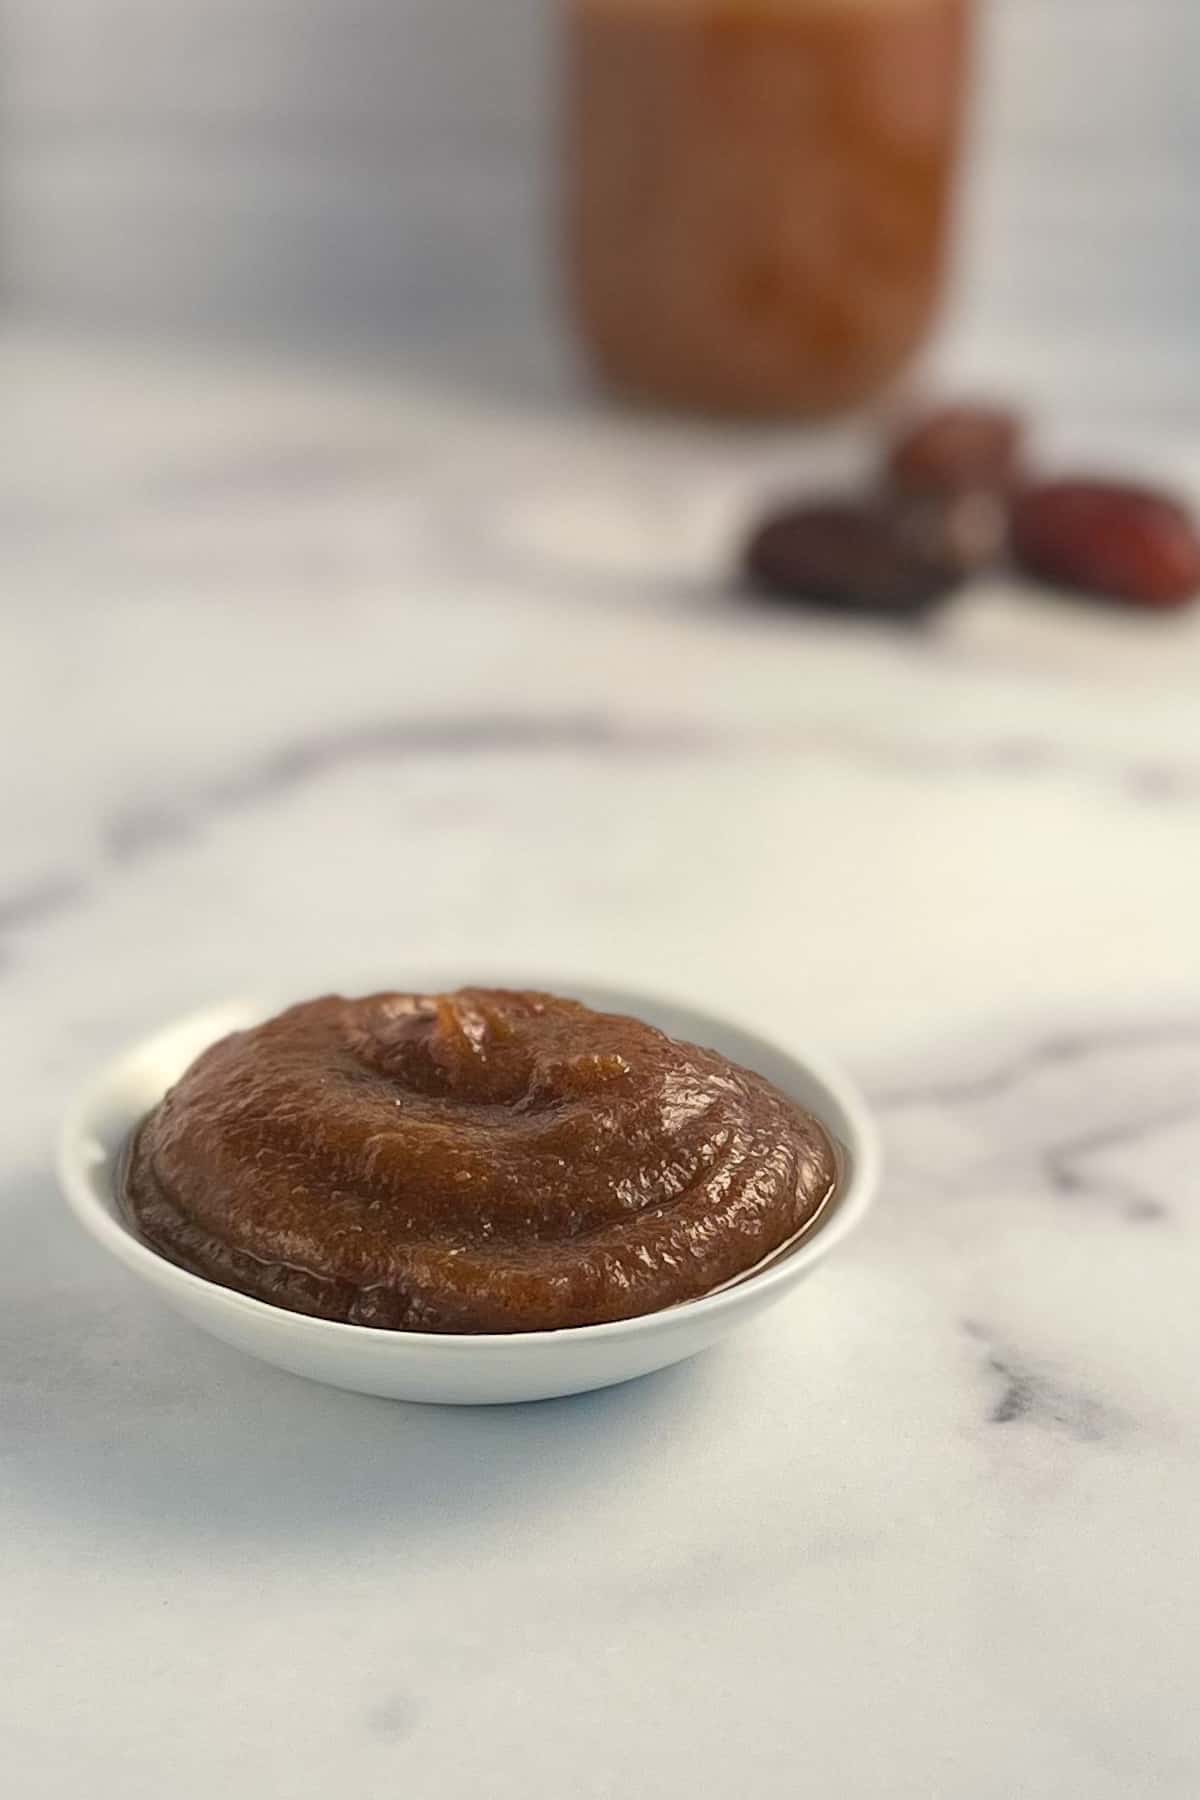 side view close up of simple homemade date syrup in a small white bowl sitting on a marble surface, with dates and a container of syrup blurred in the background